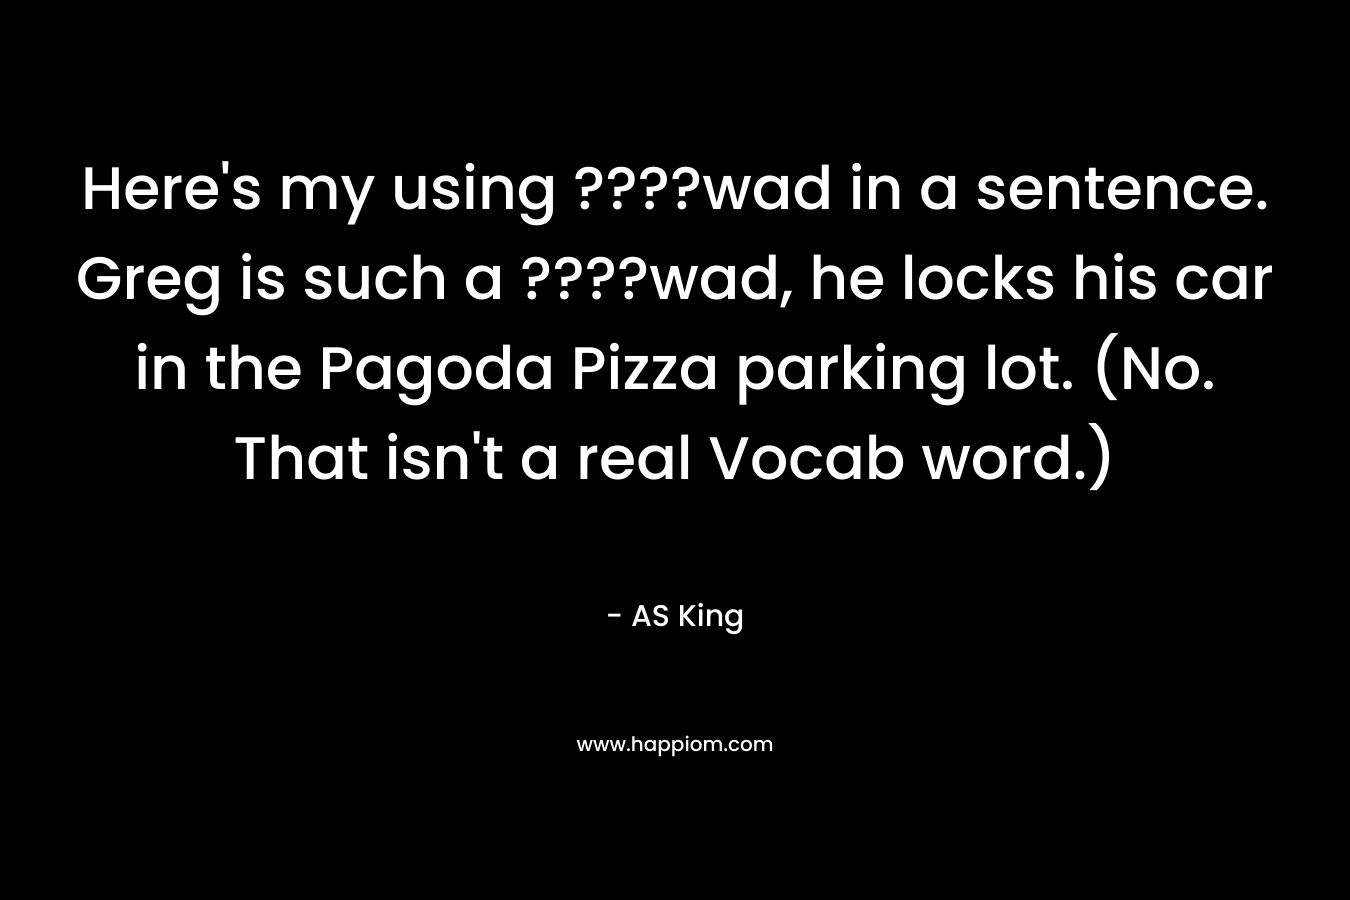 Here’s my using ????wad in a sentence. Greg is such a ????wad, he locks his car in the Pagoda Pizza parking lot. (No. That isn’t a real Vocab word.) – AS King